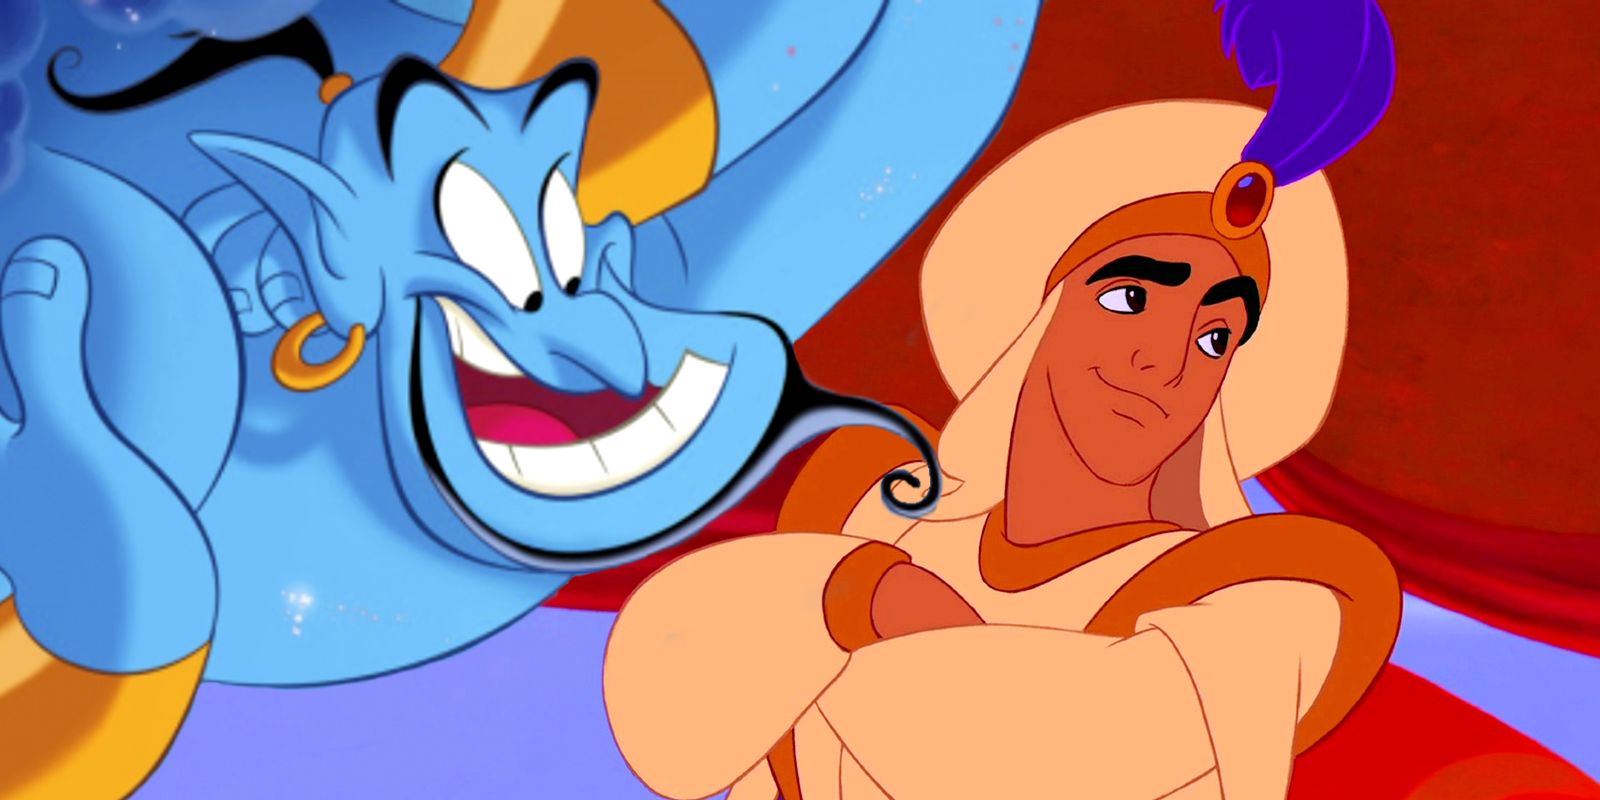 https://static1.srcdn.com/wordpress/wp-content/uploads/2021/11/Aladdin--The-Entire-Movie-Is-Just-His-First-Wish-Disney-Theory-Explained.jpg